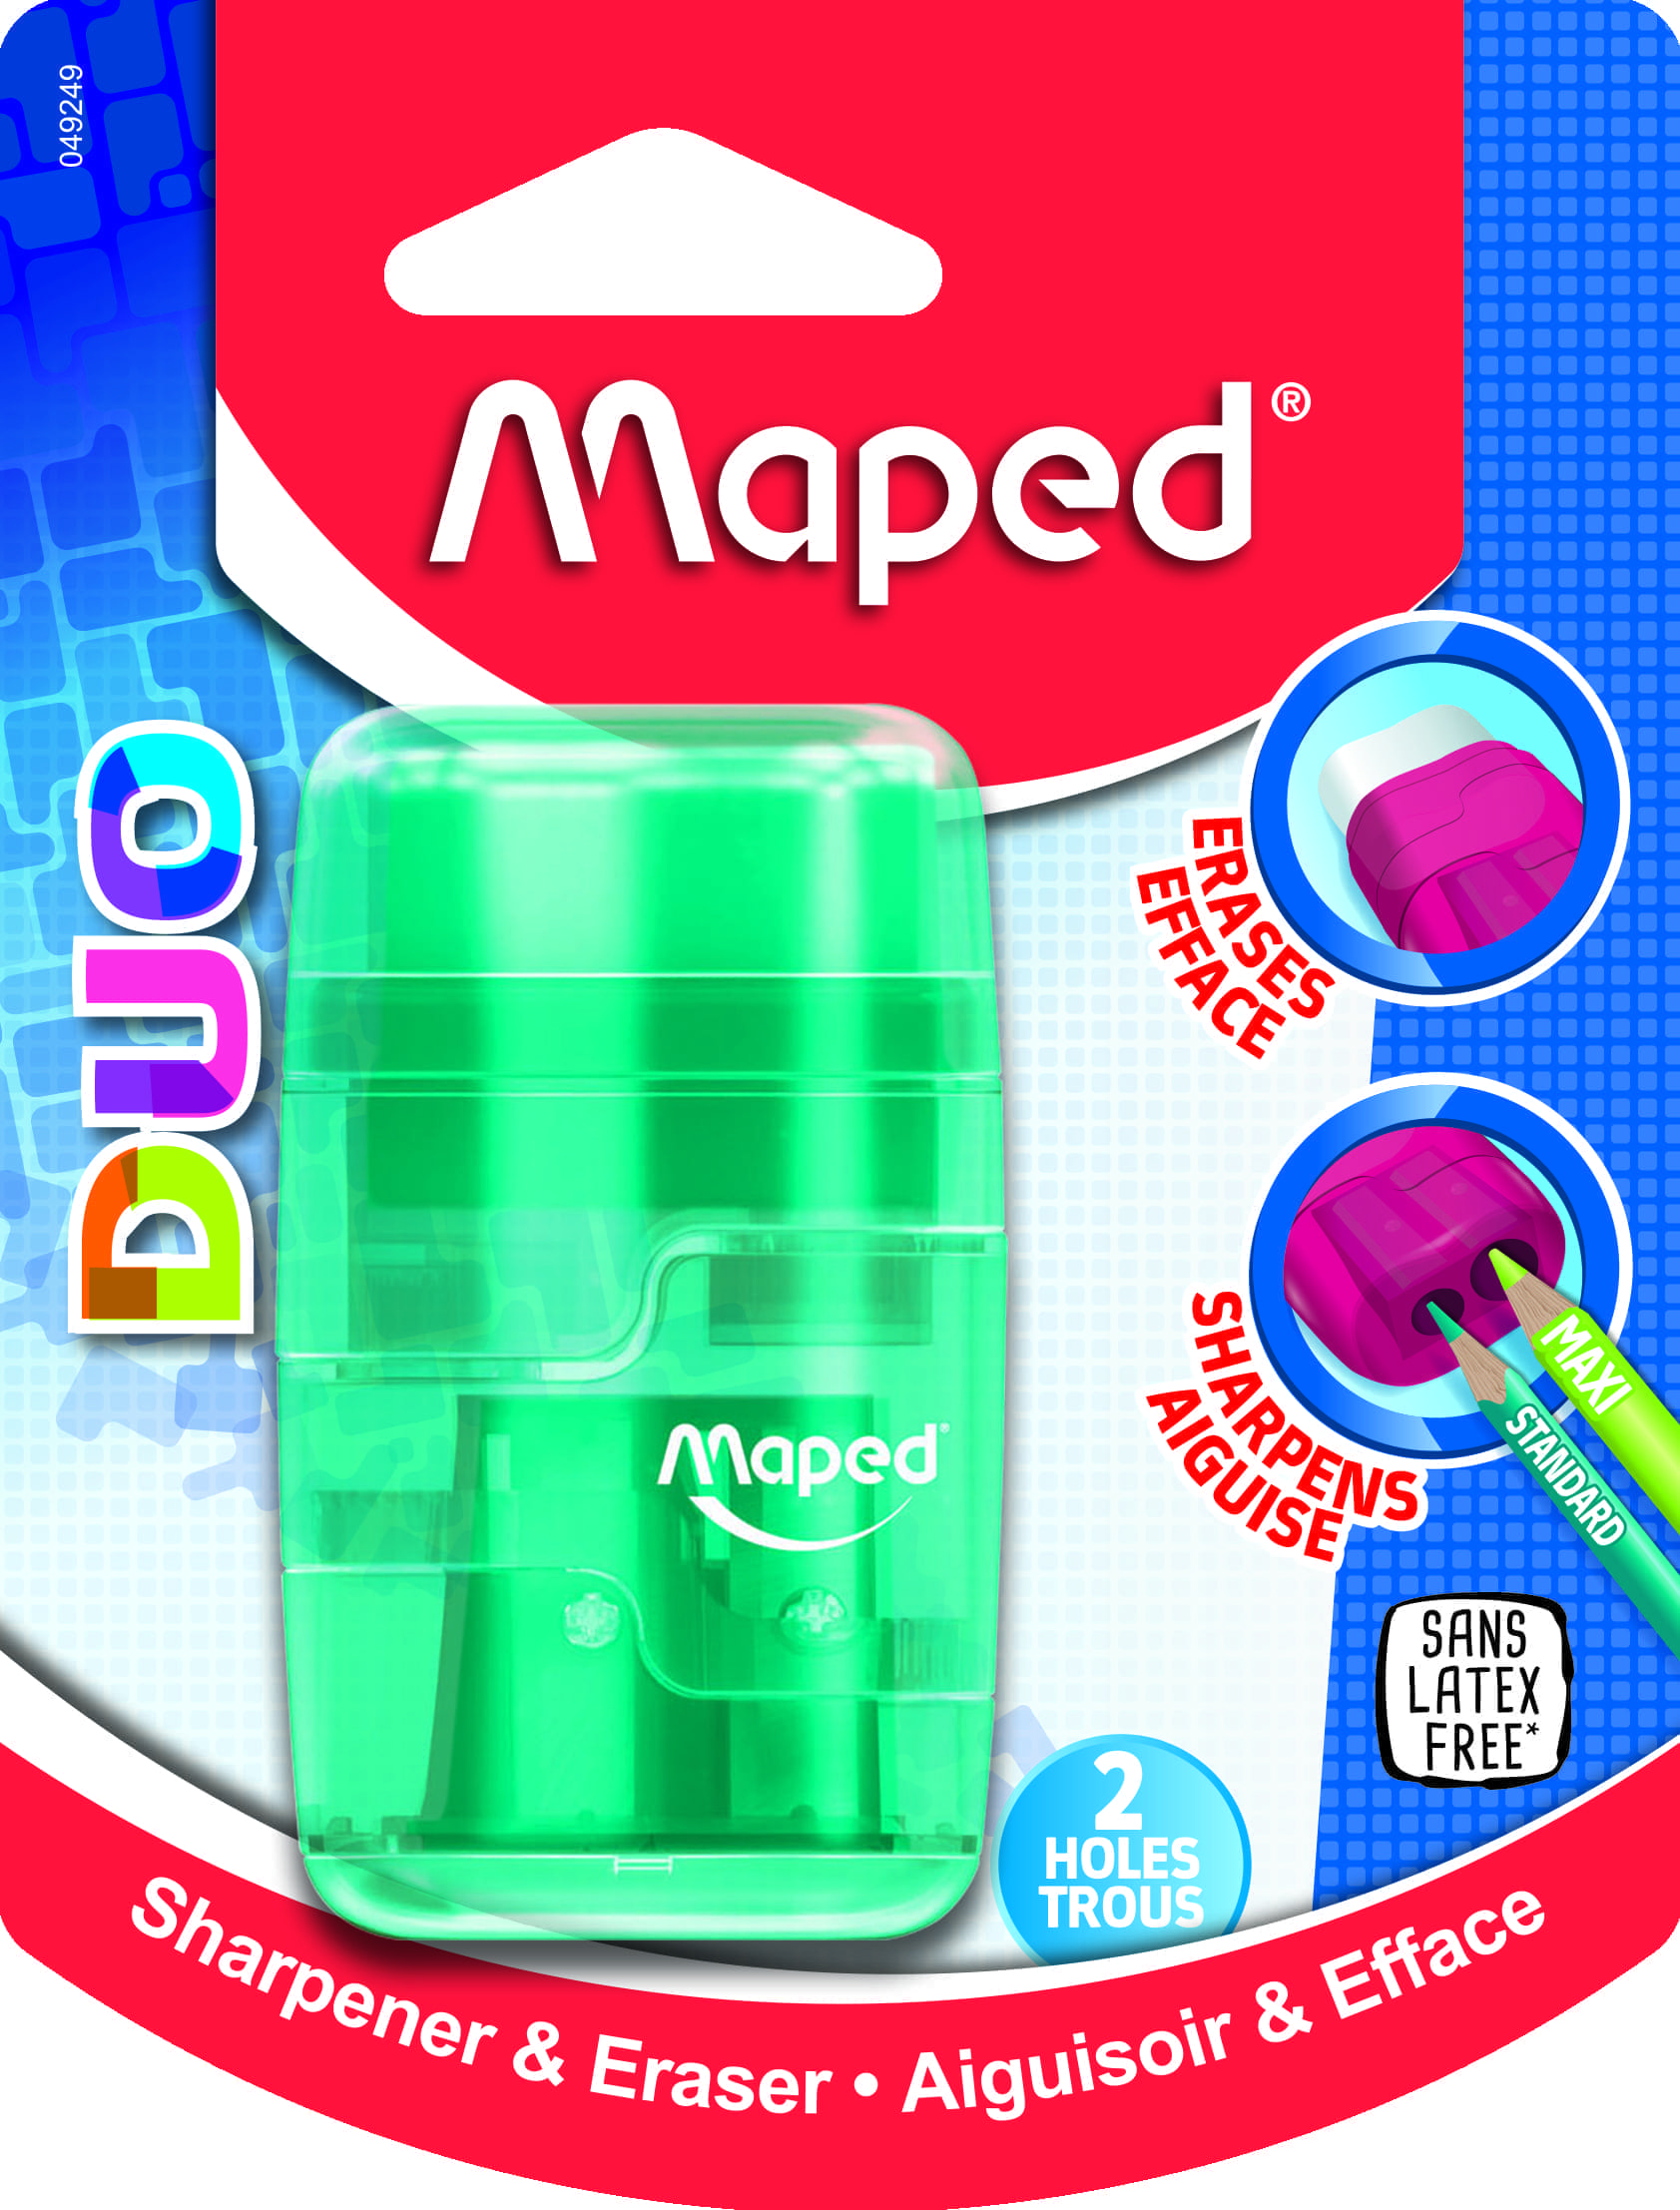 Maped Connect DUO 2-Hole Canister Pencil Sharpener & Eraser Combo